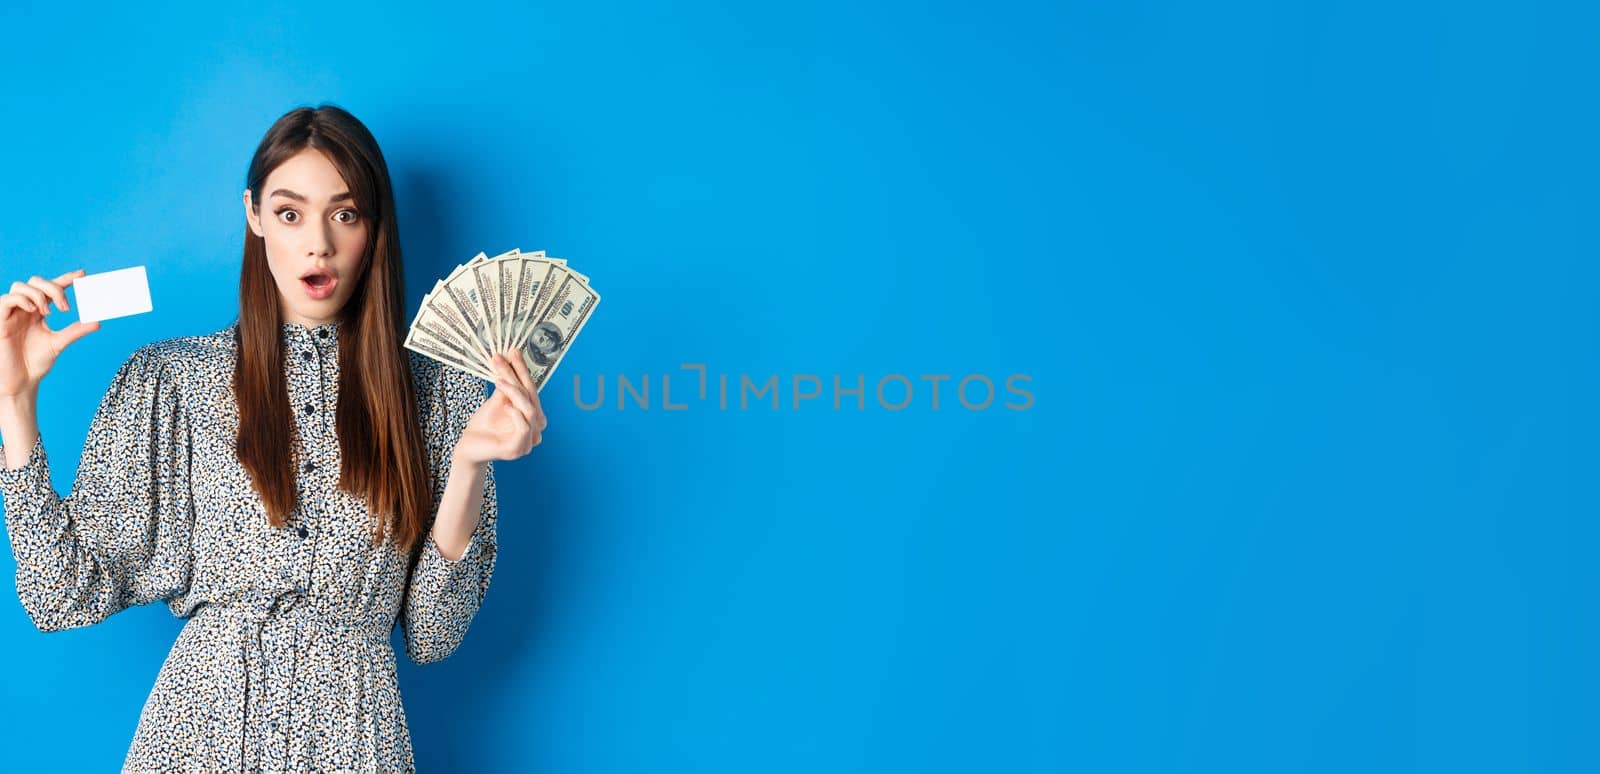 Excited lucky girl showing plastic credit card and money dollar, gasping amazed, buying something expensive, standing on blue background.